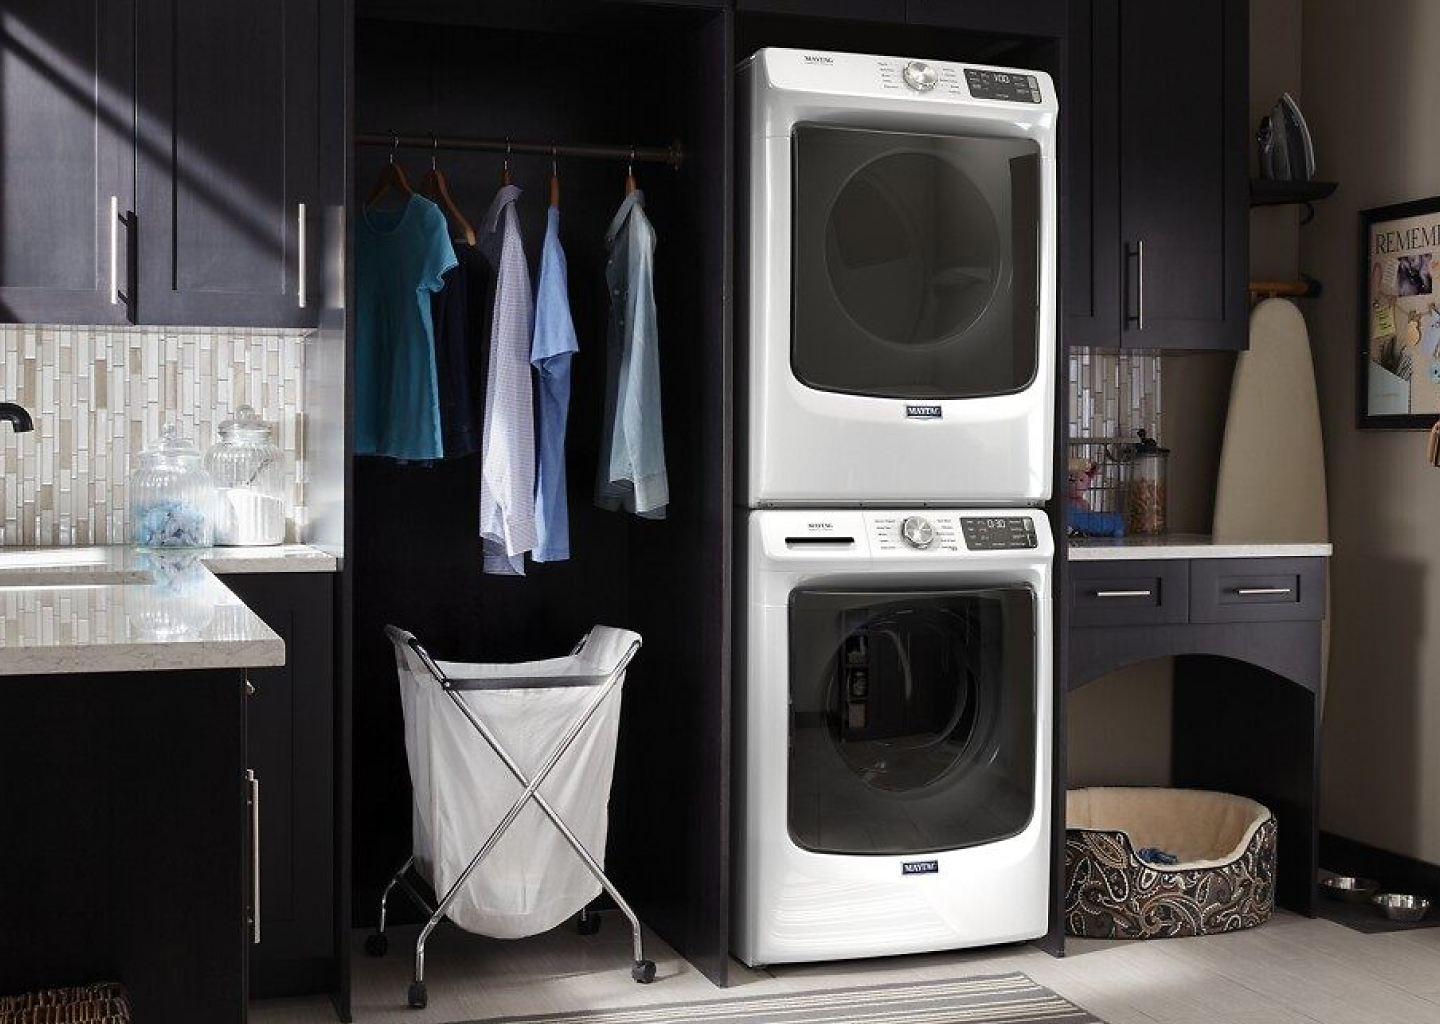 Frigidaire Double Stack Washer Dryer is Possible